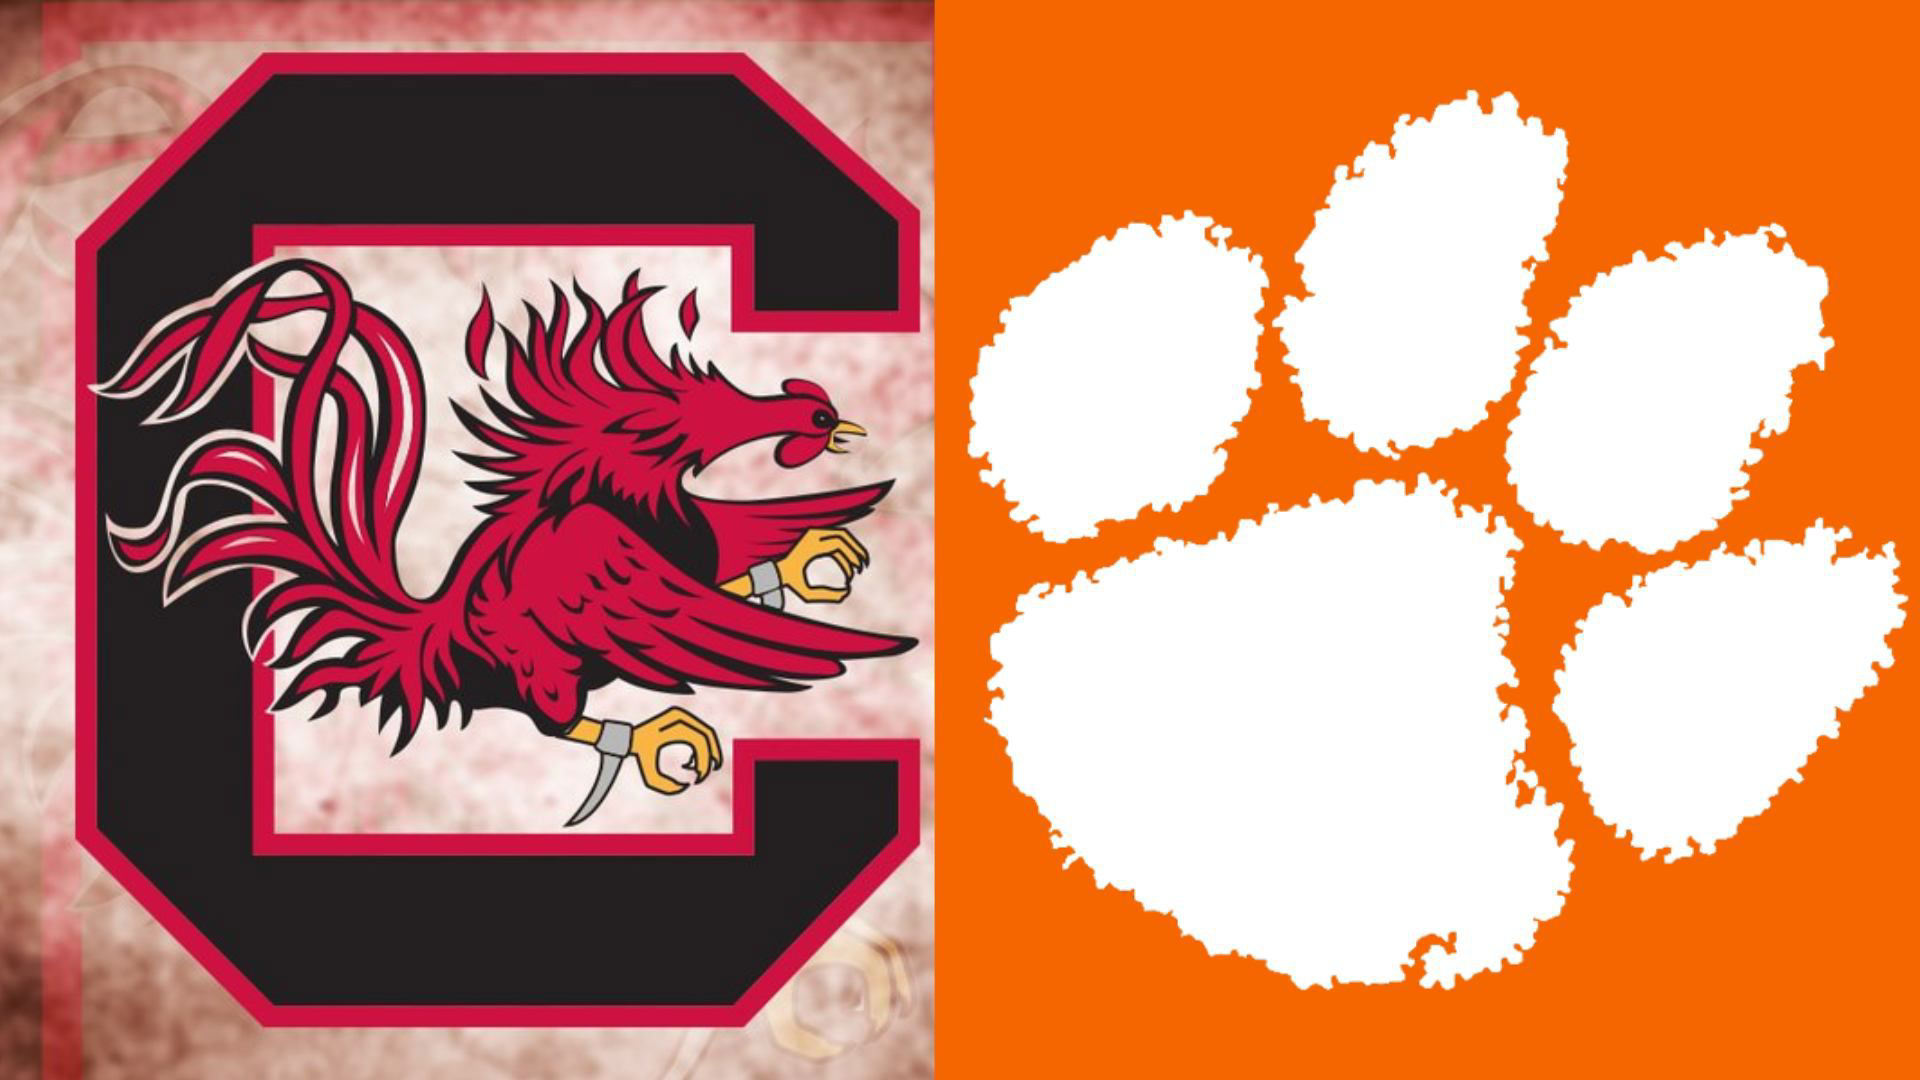 Game time announced for Clemson Carolina matchup